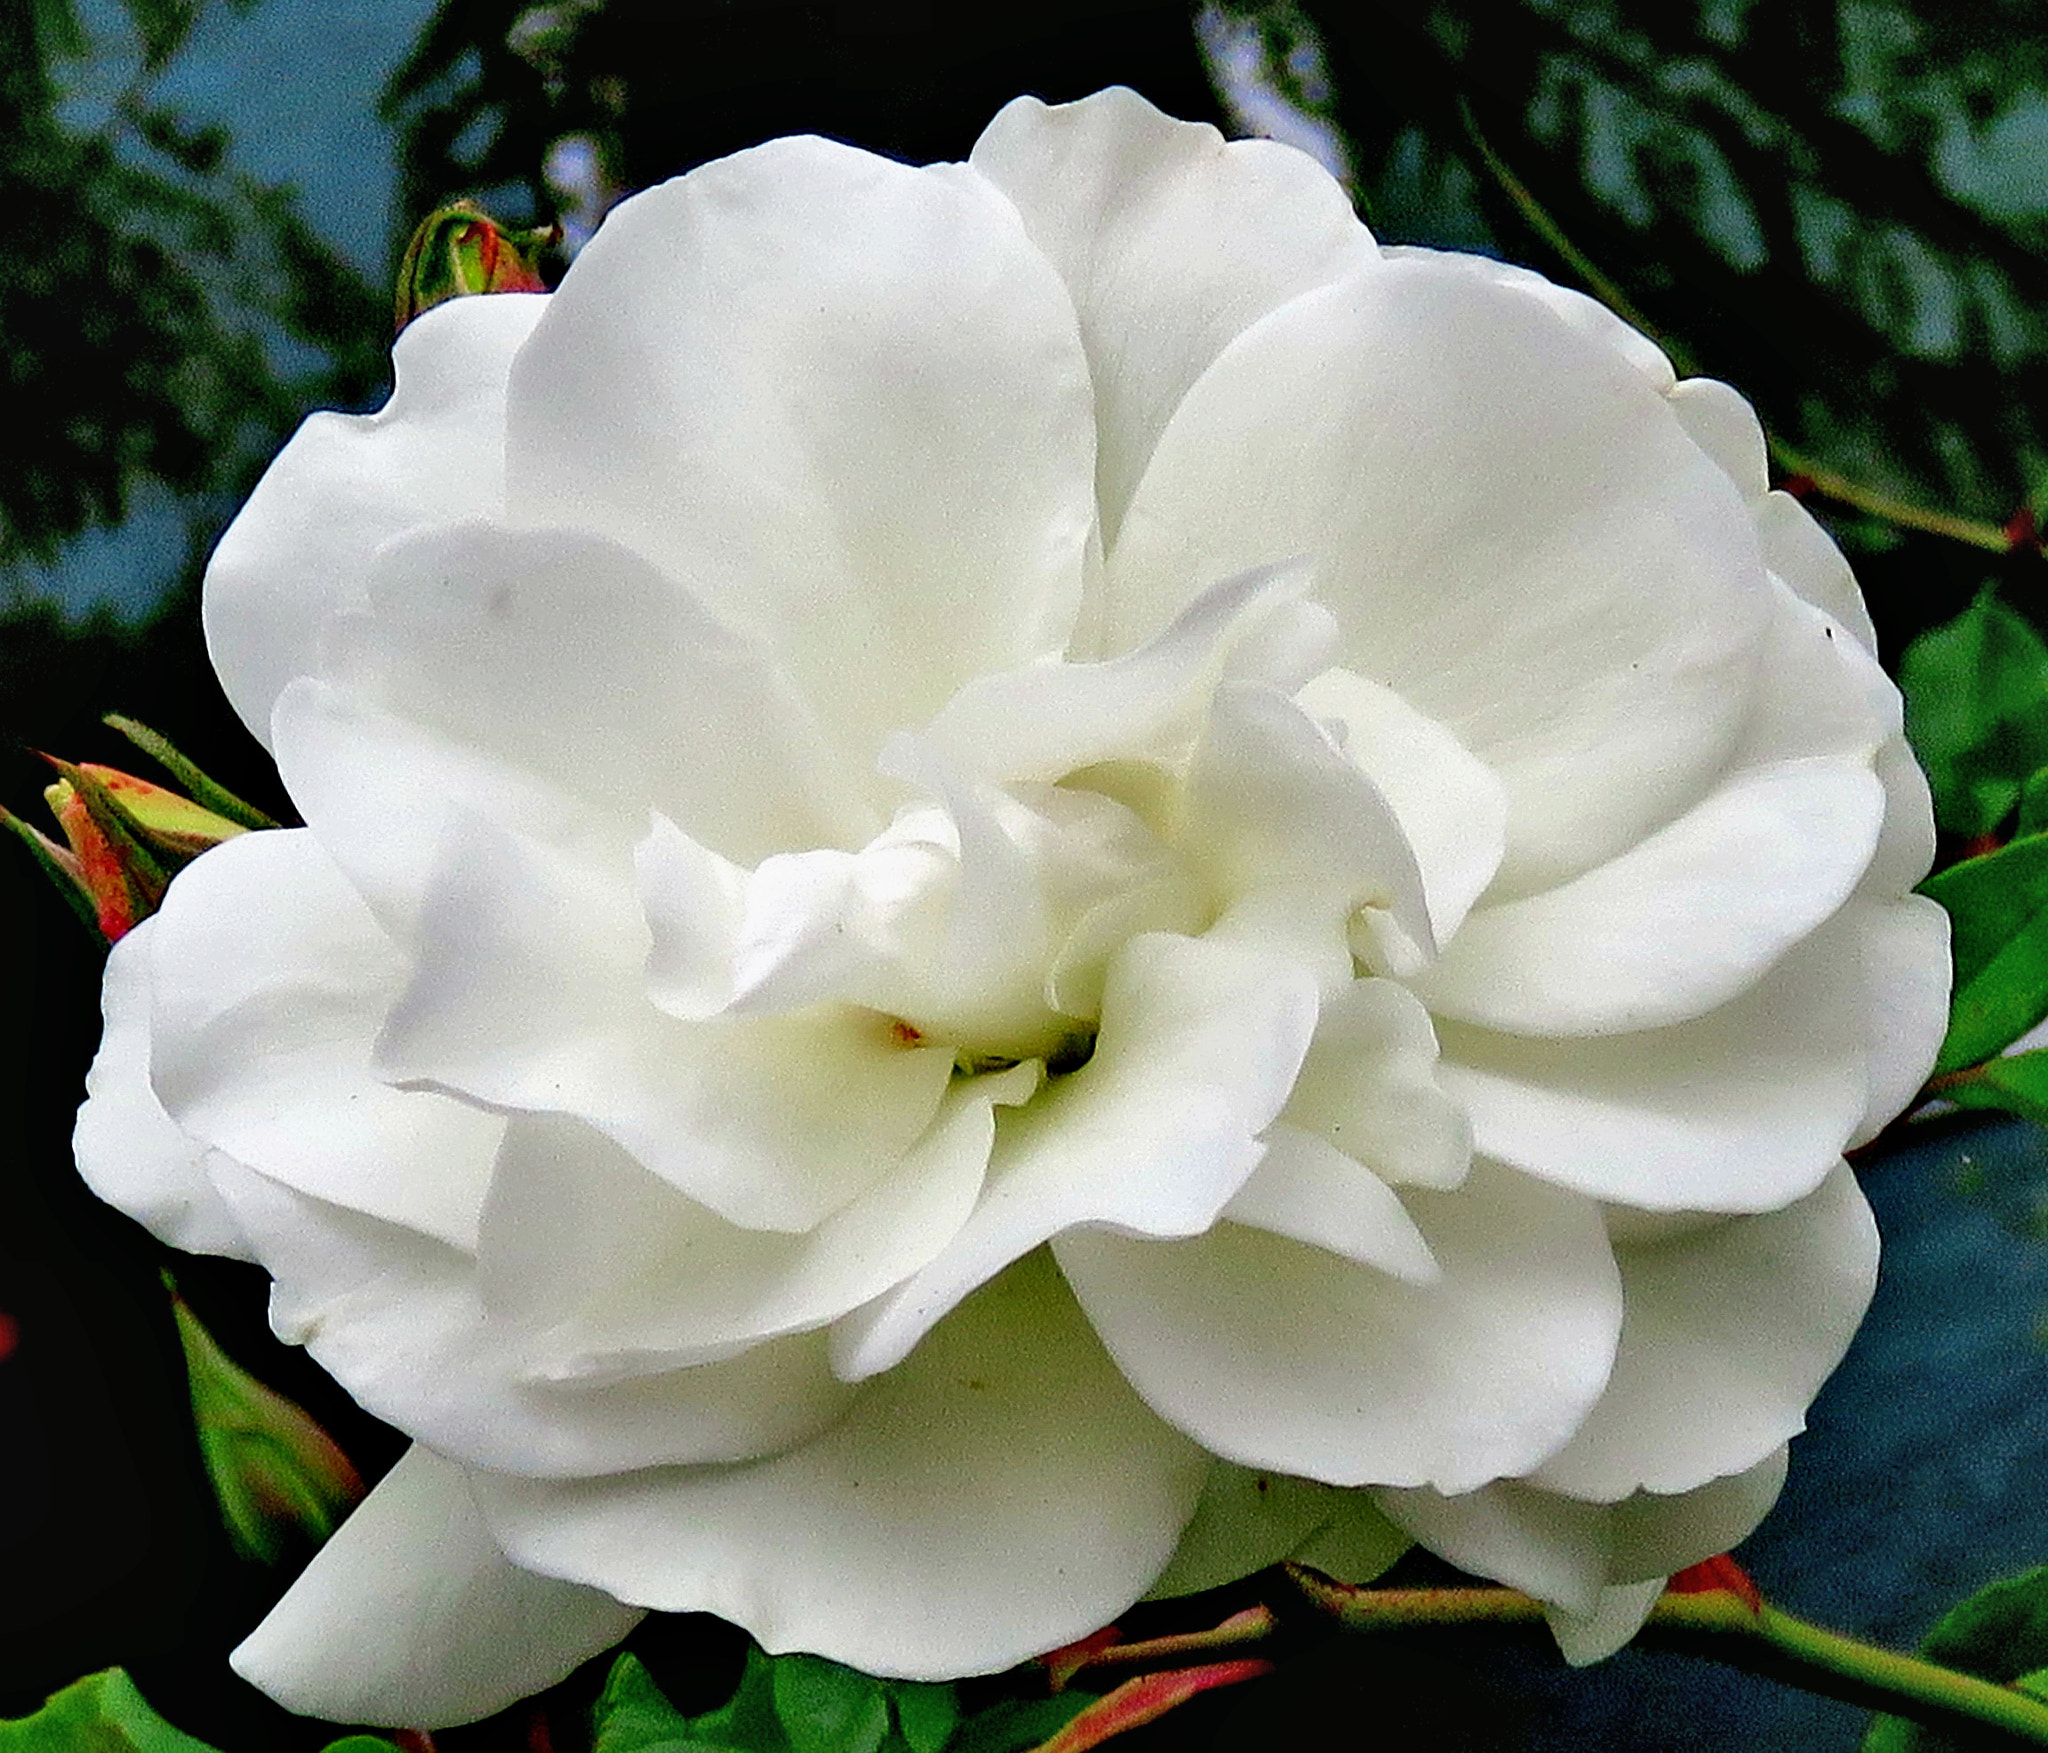 Canon PowerShot SX60 HS sample photo. A lovely white carnation flower photography